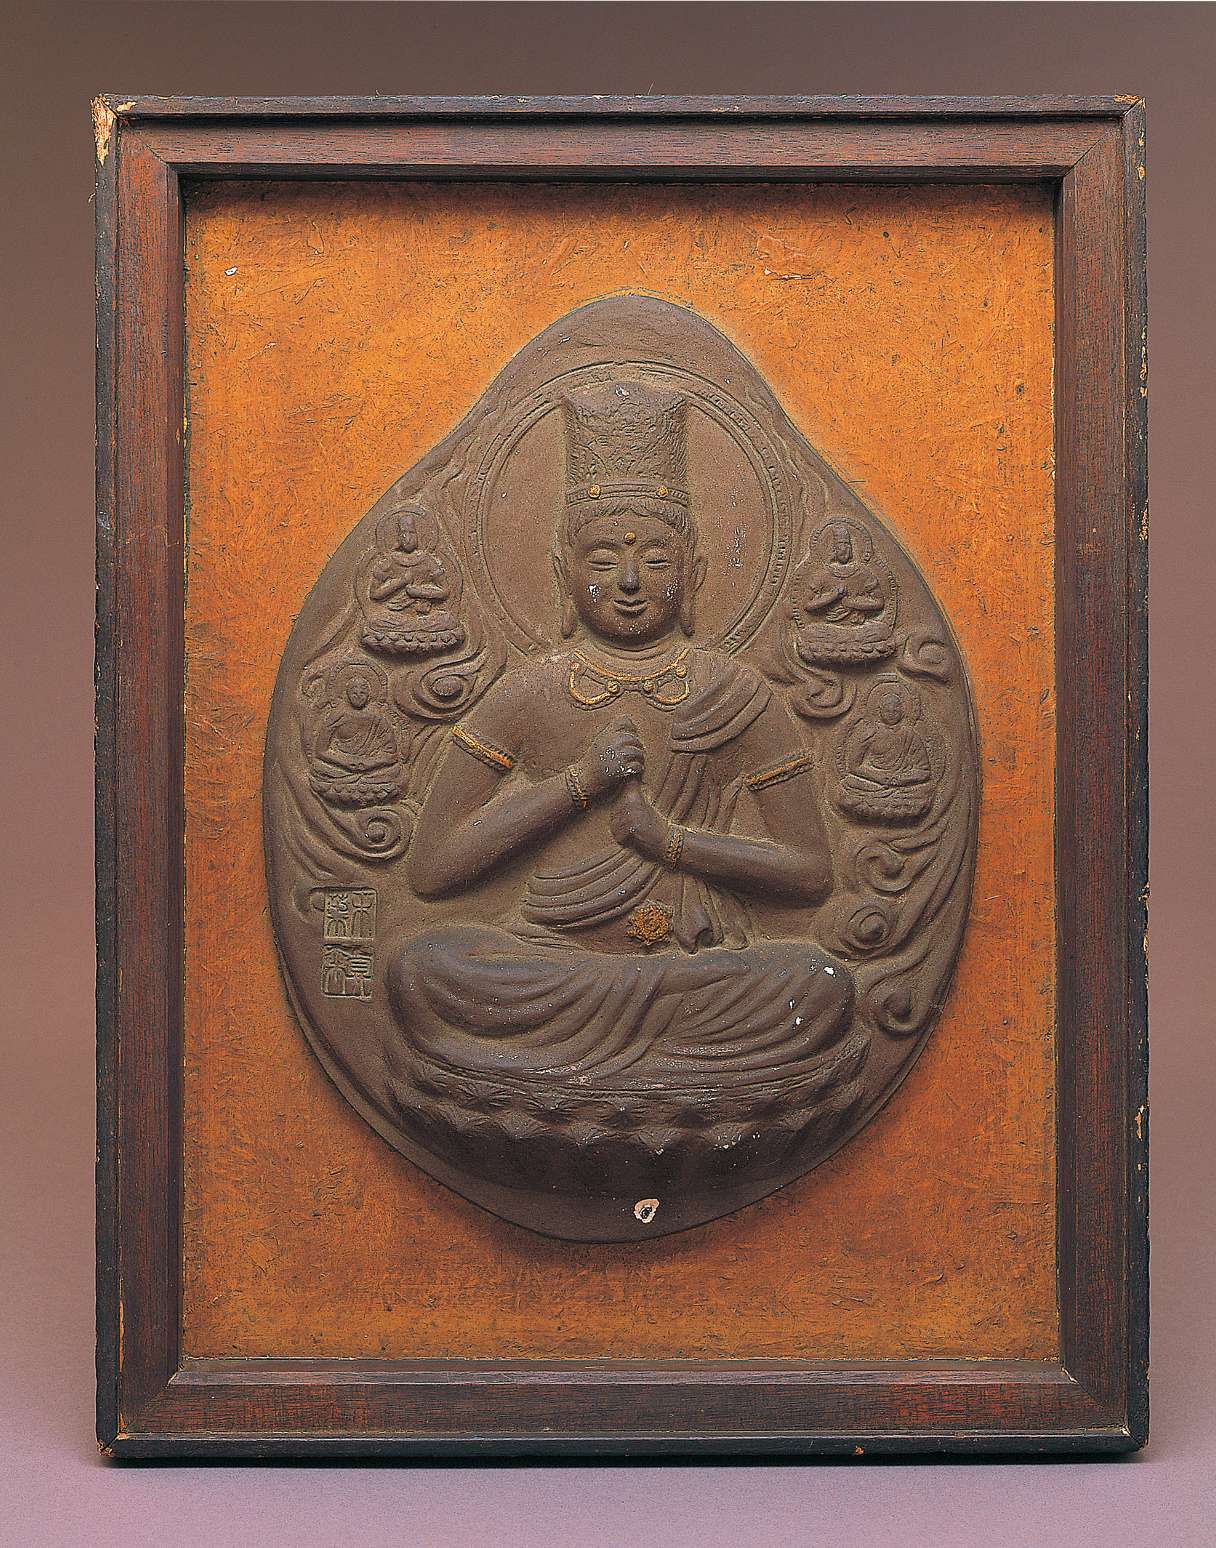 An upright almond-shaped brown relief of a buddha wearing a tall crown sitting cross-legged, grasping his upturned left index finger with his right hand, surrounded by clouds and four smaller buddhas.